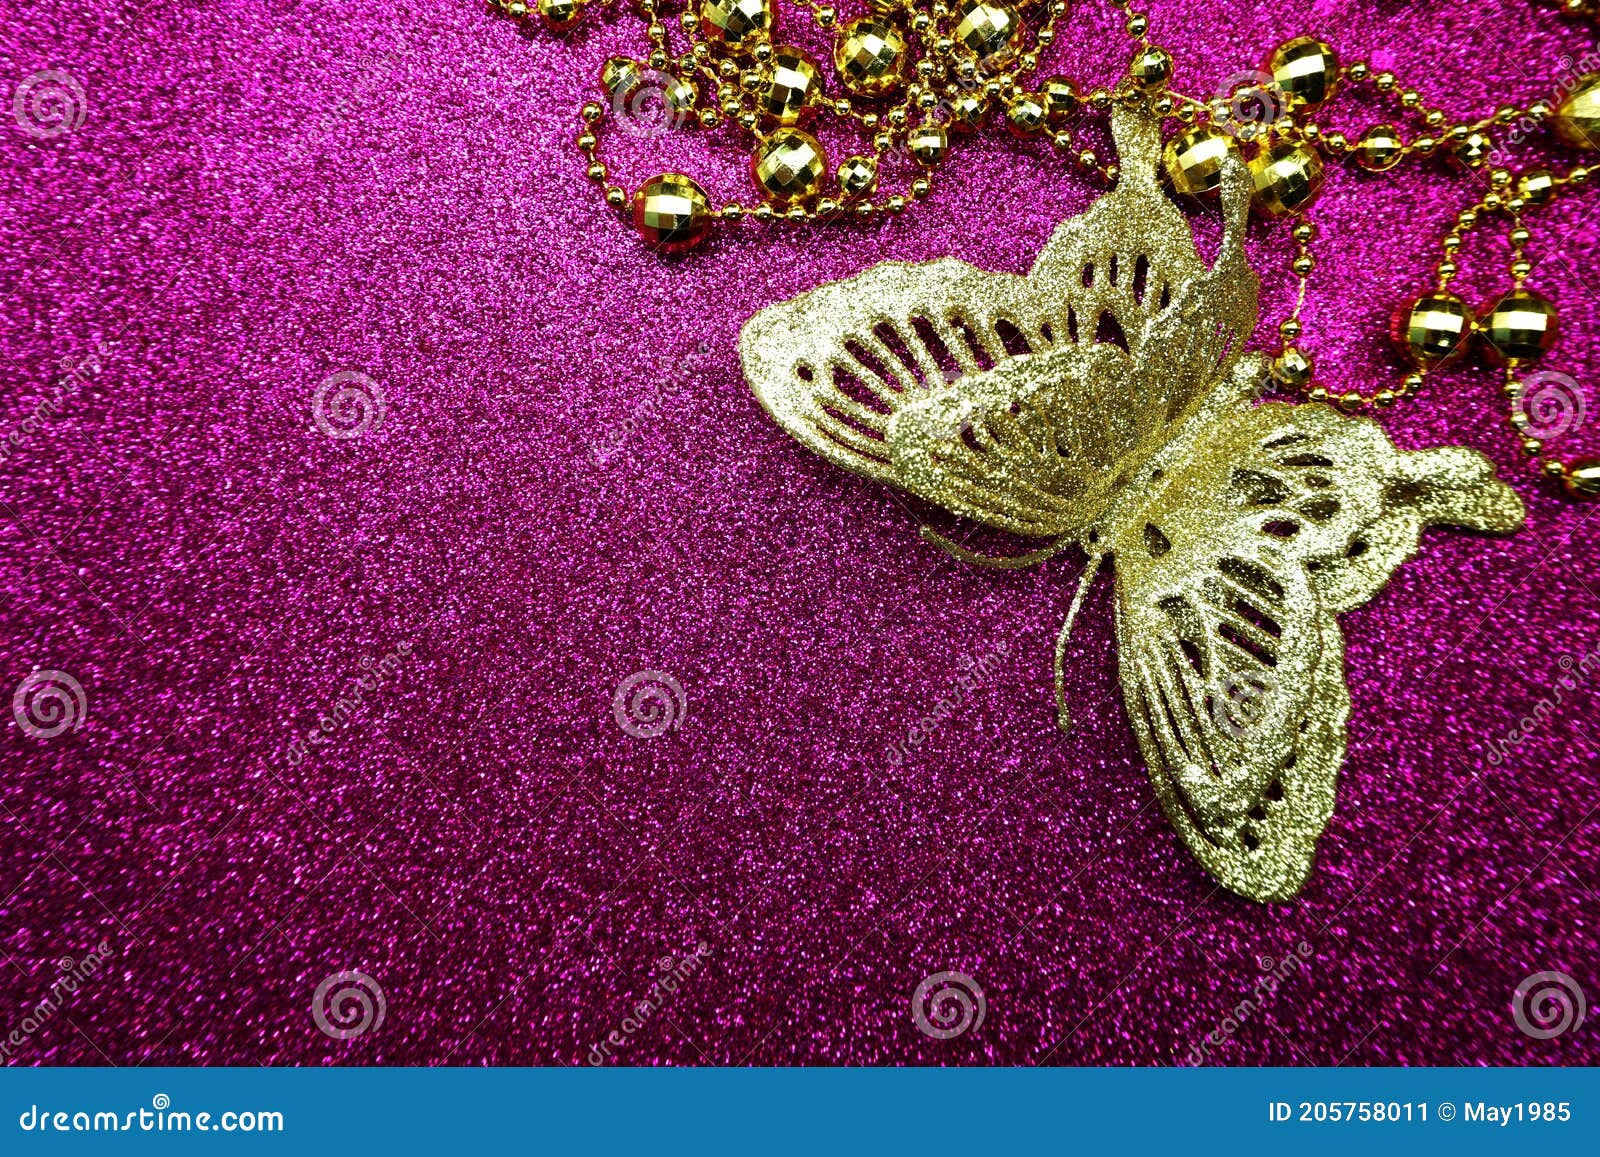 Butterfly You are in the right place about glitter silver Here we offer you  the most  cute aesthetic butterfly HD phone wallpaper  Pxfuel